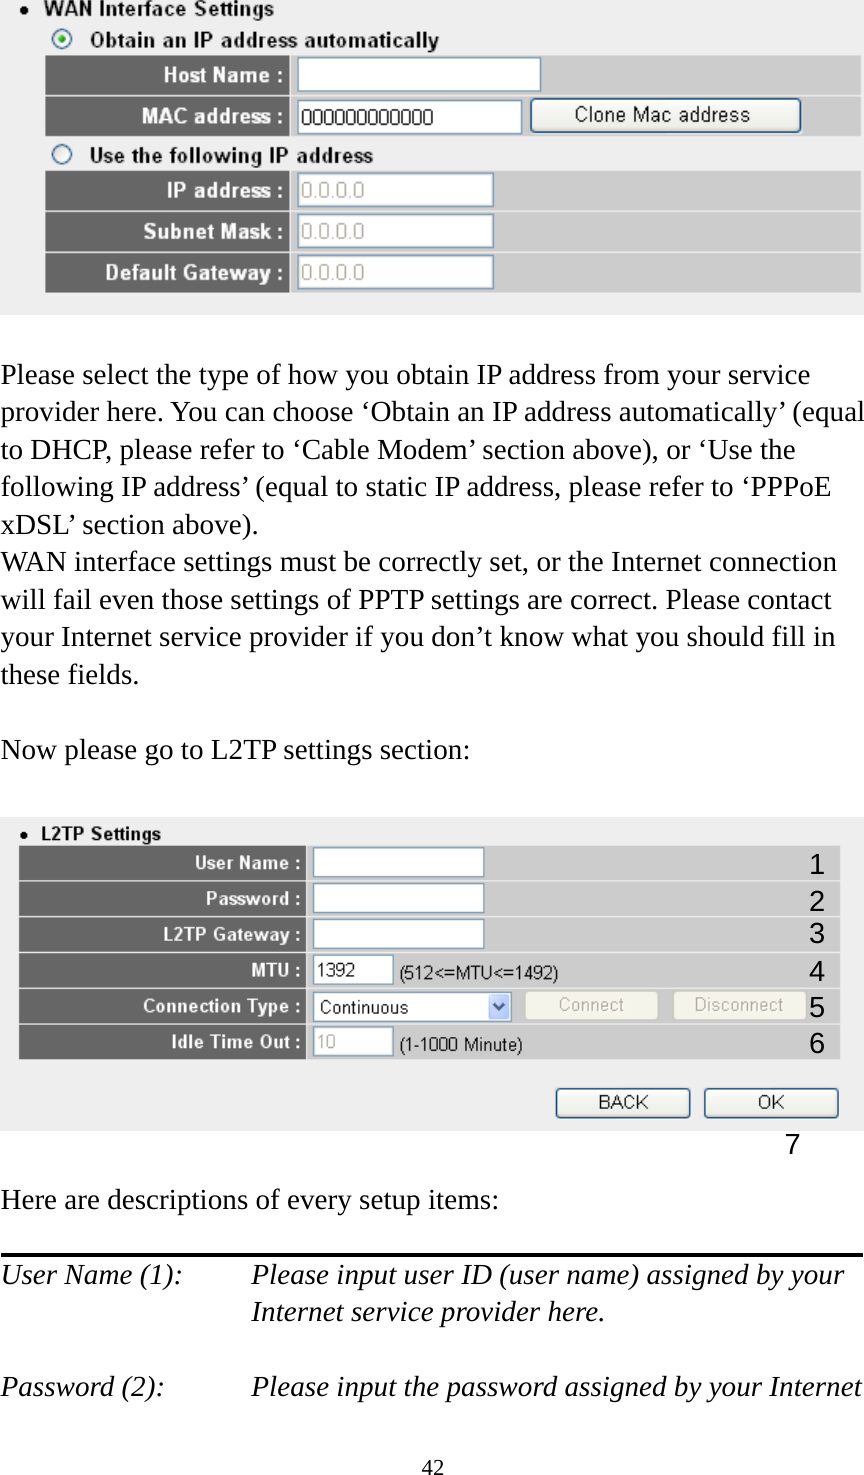 42   Please select the type of how you obtain IP address from your service provider here. You can choose ‘Obtain an IP address automatically’ (equal to DHCP, please refer to ‘Cable Modem’ section above), or ‘Use the following IP address’ (equal to static IP address, please refer to ‘PPPoE xDSL’ section above).   WAN interface settings must be correctly set, or the Internet connection will fail even those settings of PPTP settings are correct. Please contact your Internet service provider if you don’t know what you should fill in these fields.  Now please go to L2TP settings section:    Here are descriptions of every setup items:  User Name (1):     Please input user ID (user name) assigned by your      Internet service provider here.  Password (2):    Please input the password assigned by your Internet 1 2 4 3 5 7 6 